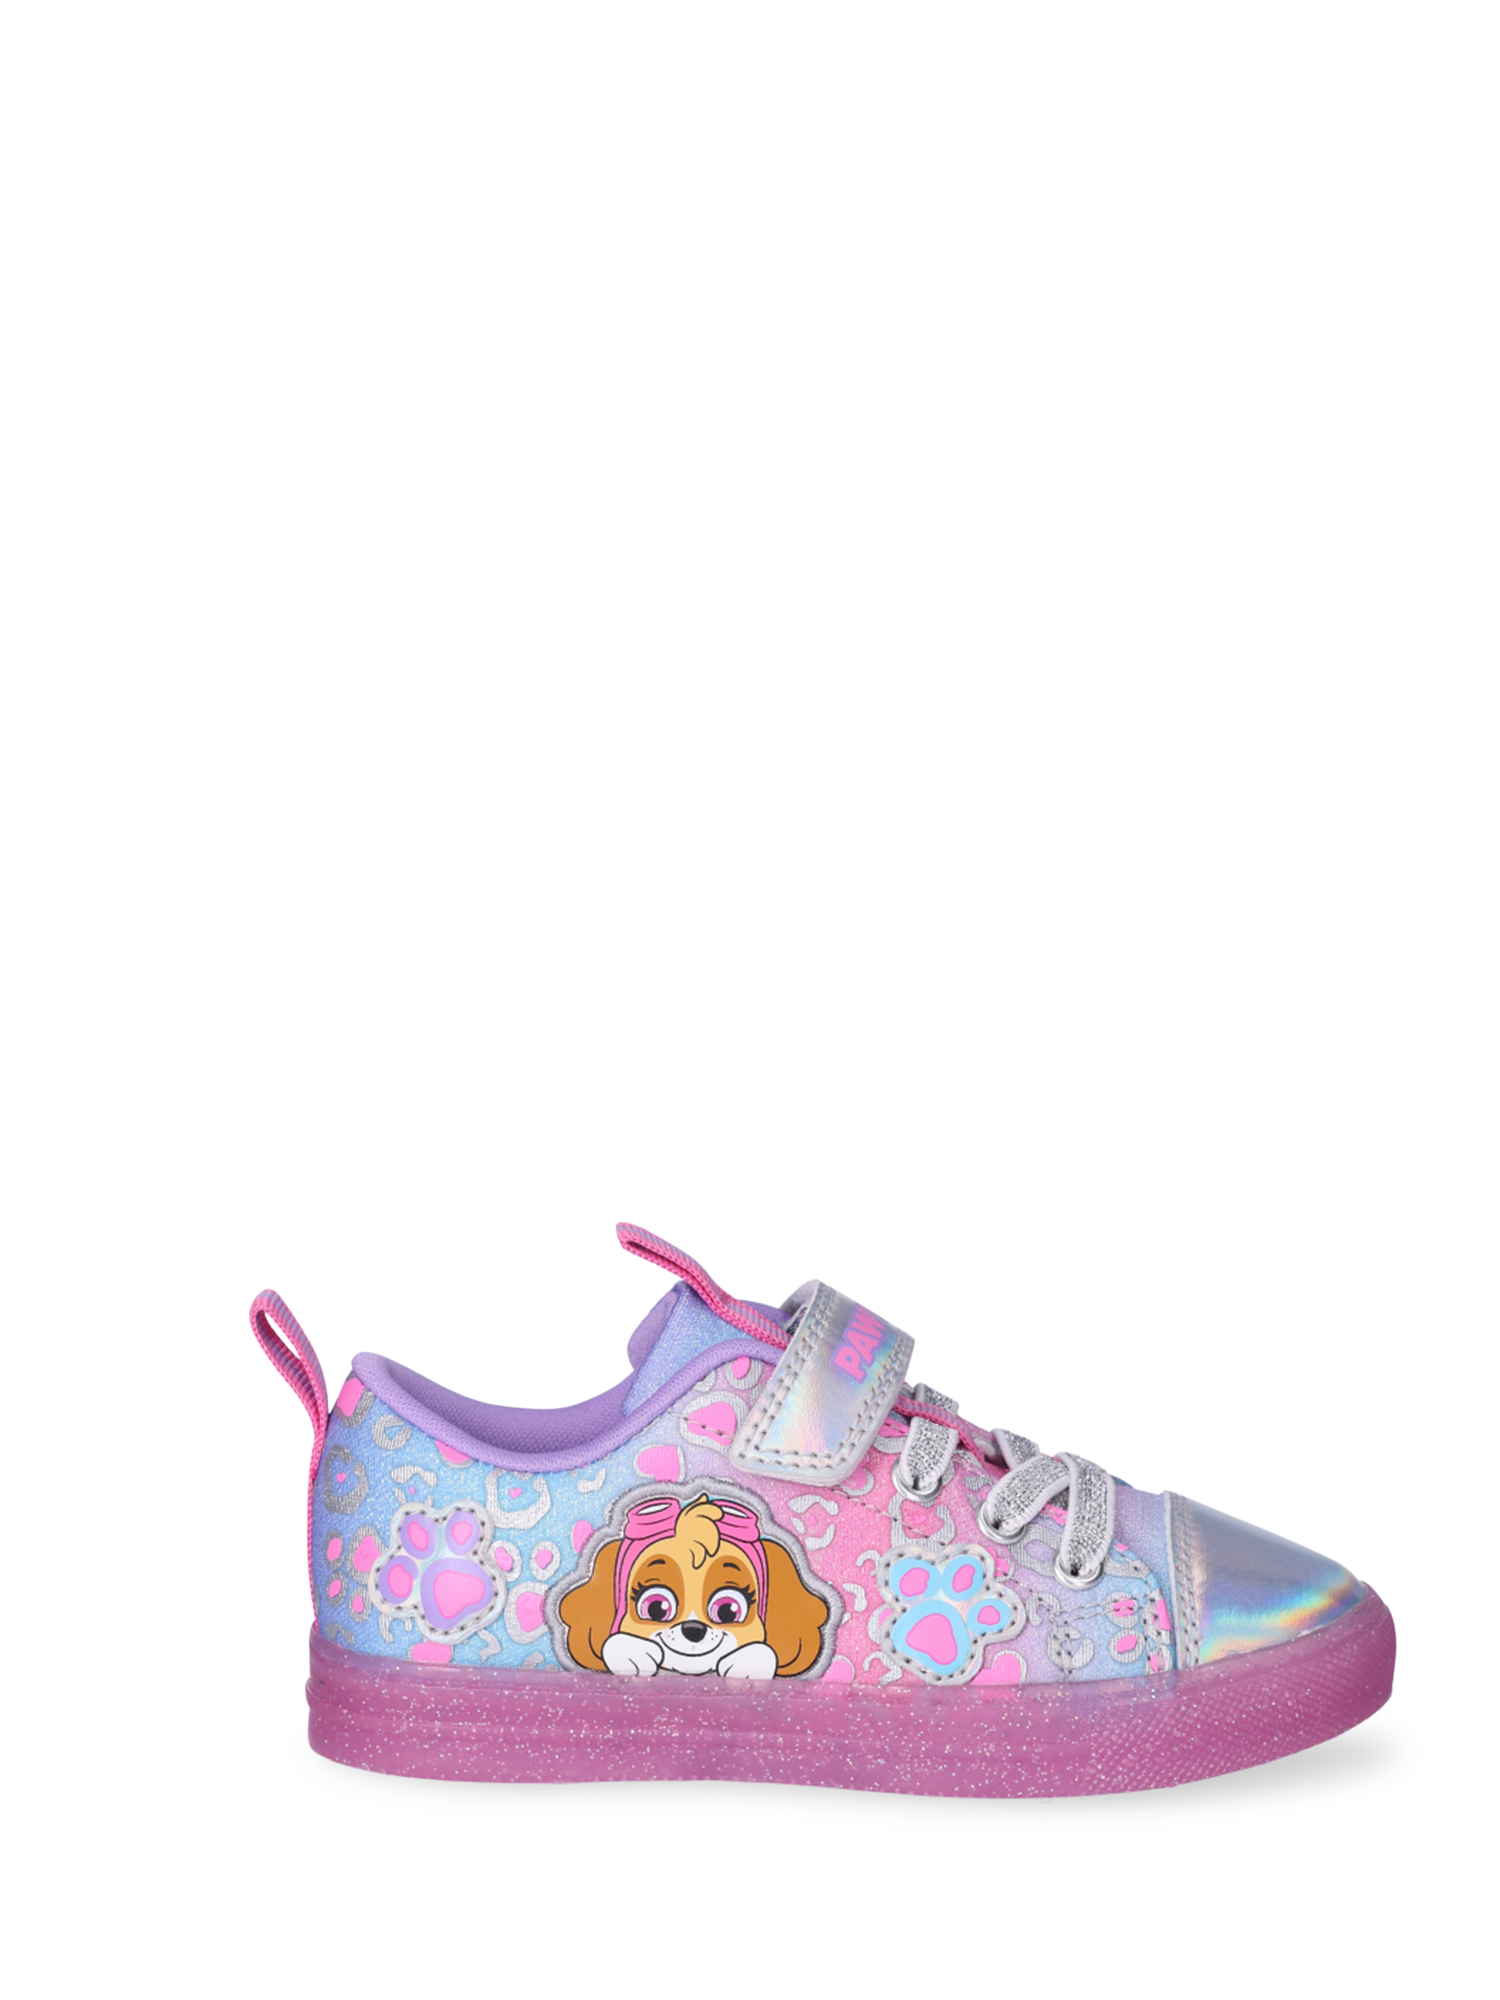 Paw Patrol Toddler Girl Casual Sneakers, Sizes 5-12 